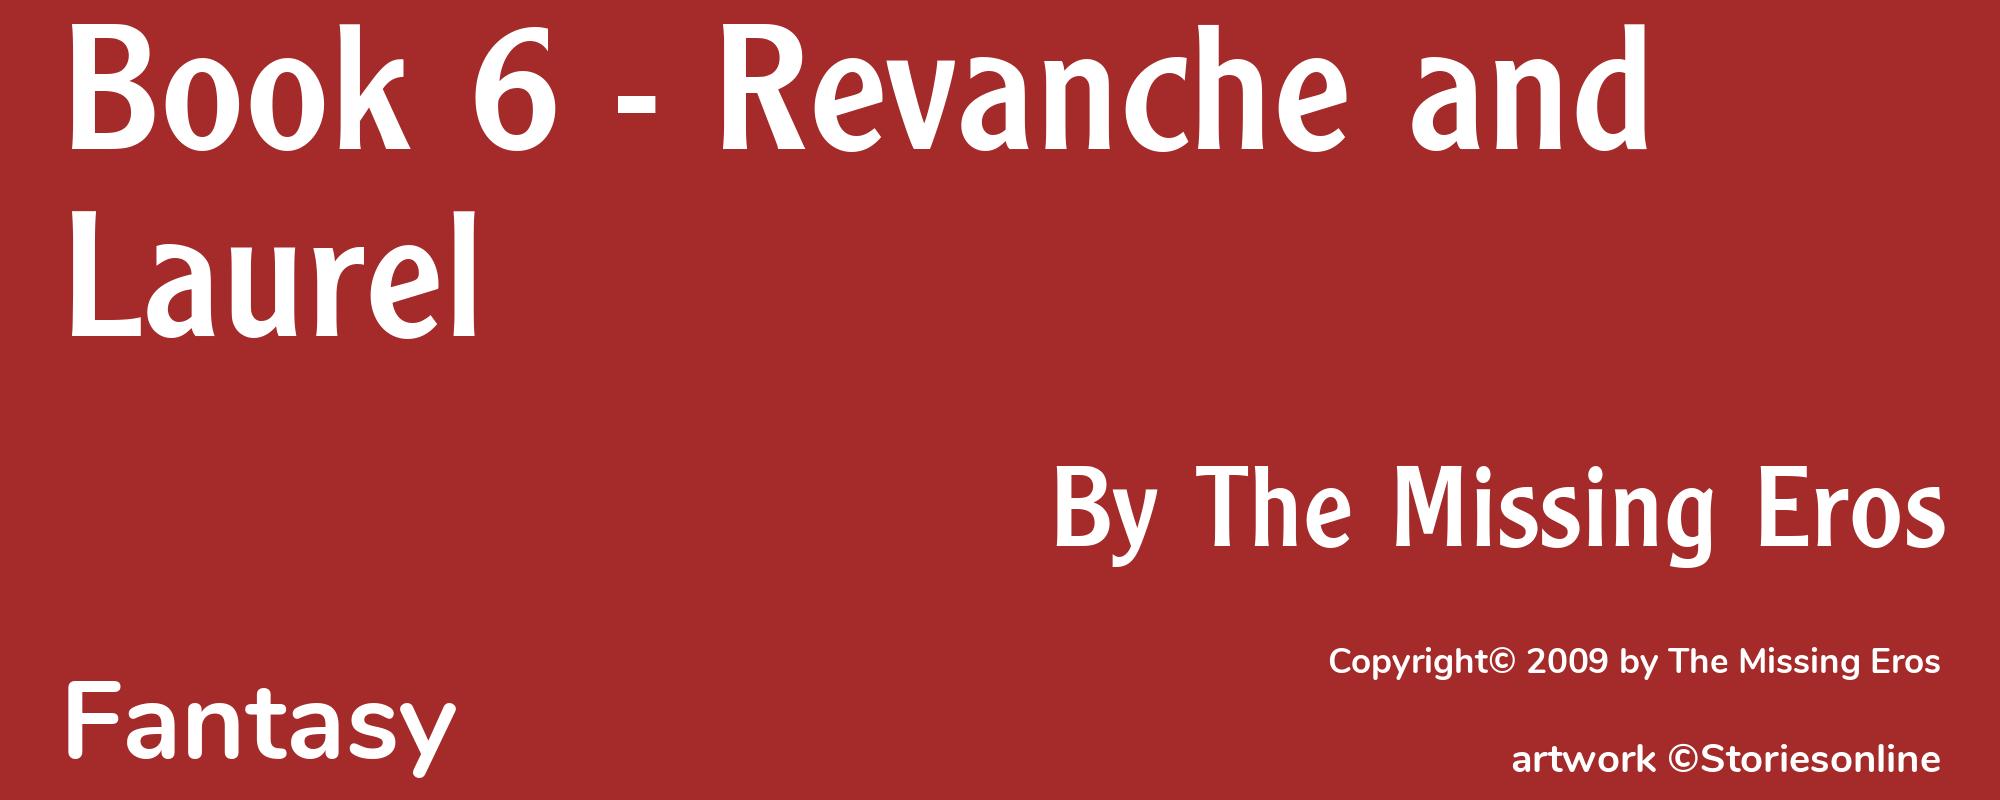 Book 6 - Revanche and Laurel - Cover